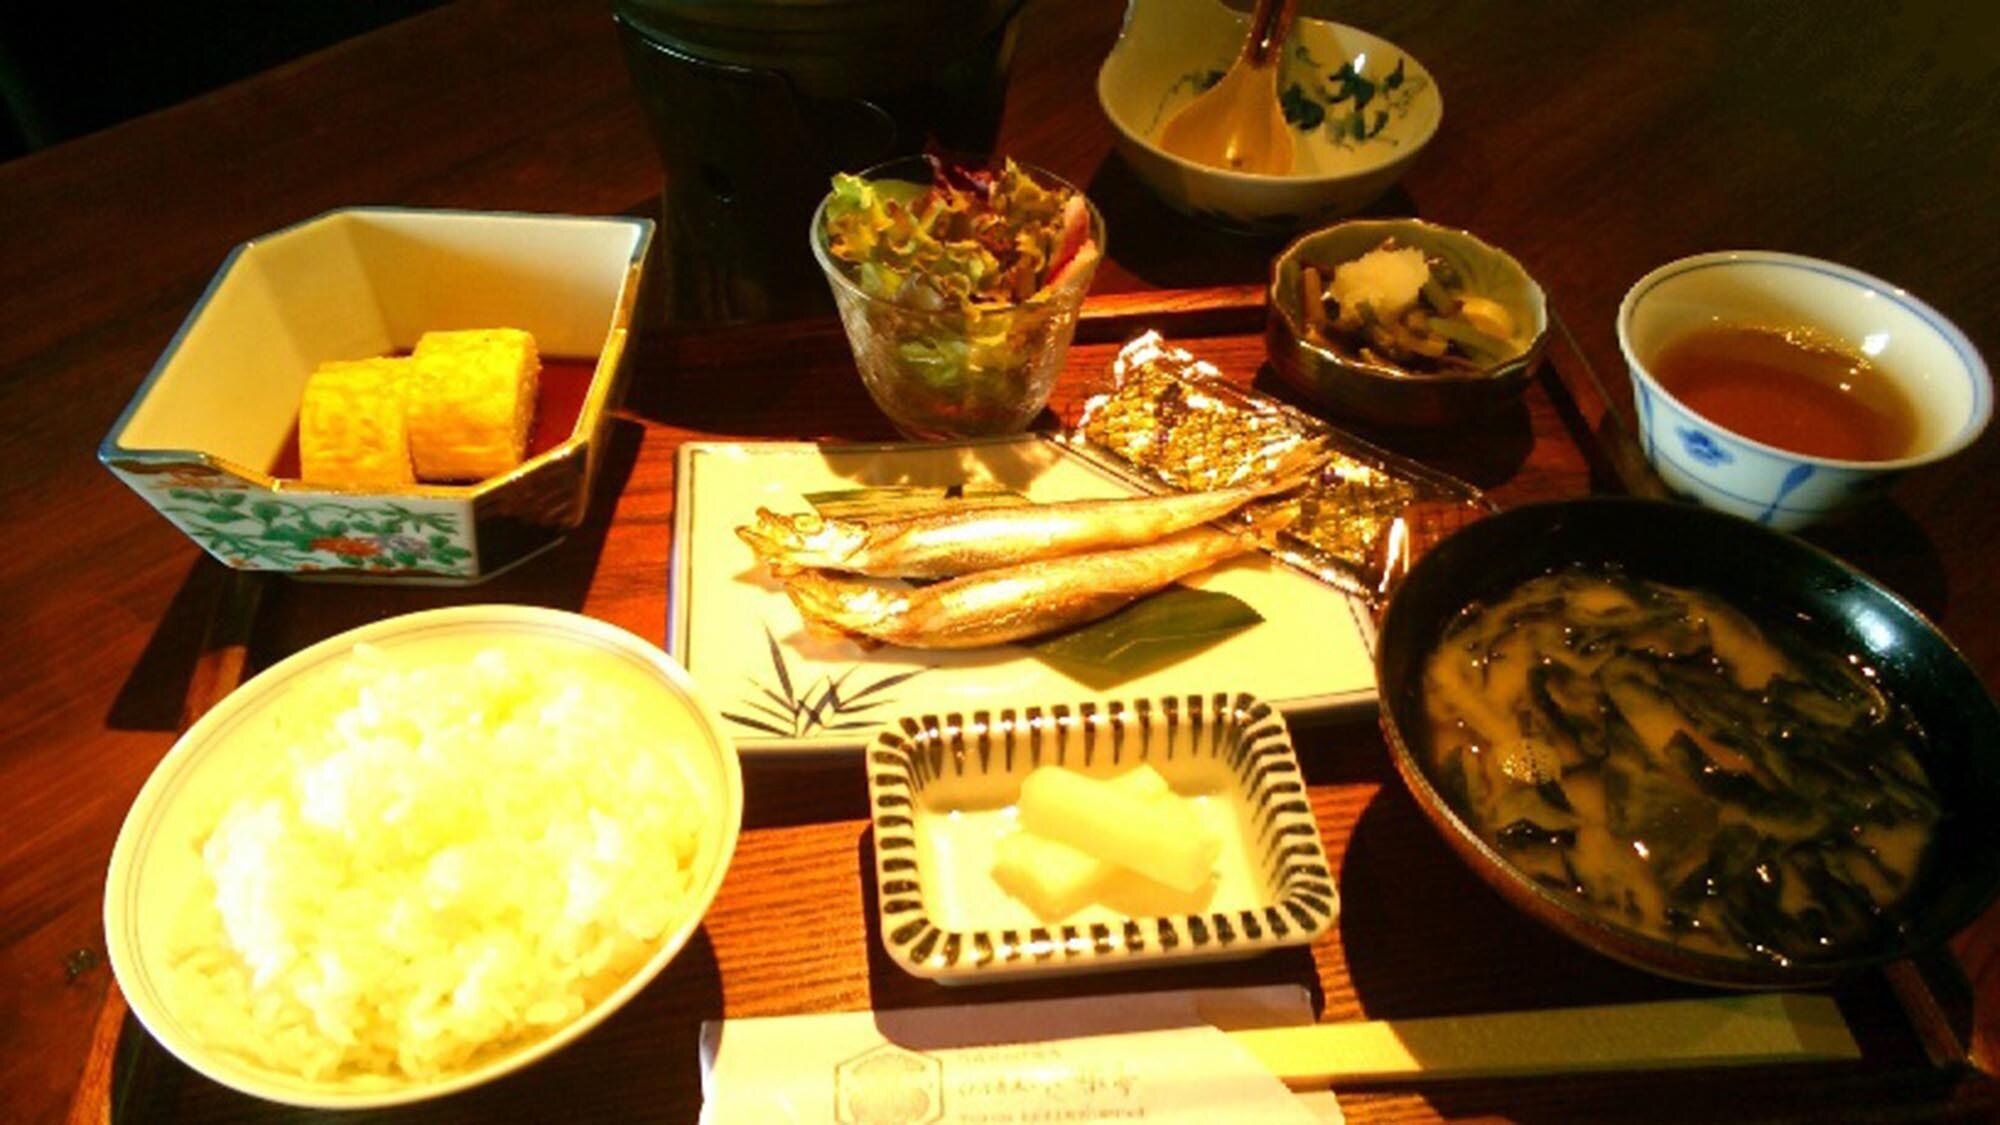 ・ It is a popular Japanese set meal using rice Hinohikari from Nara prefecture.